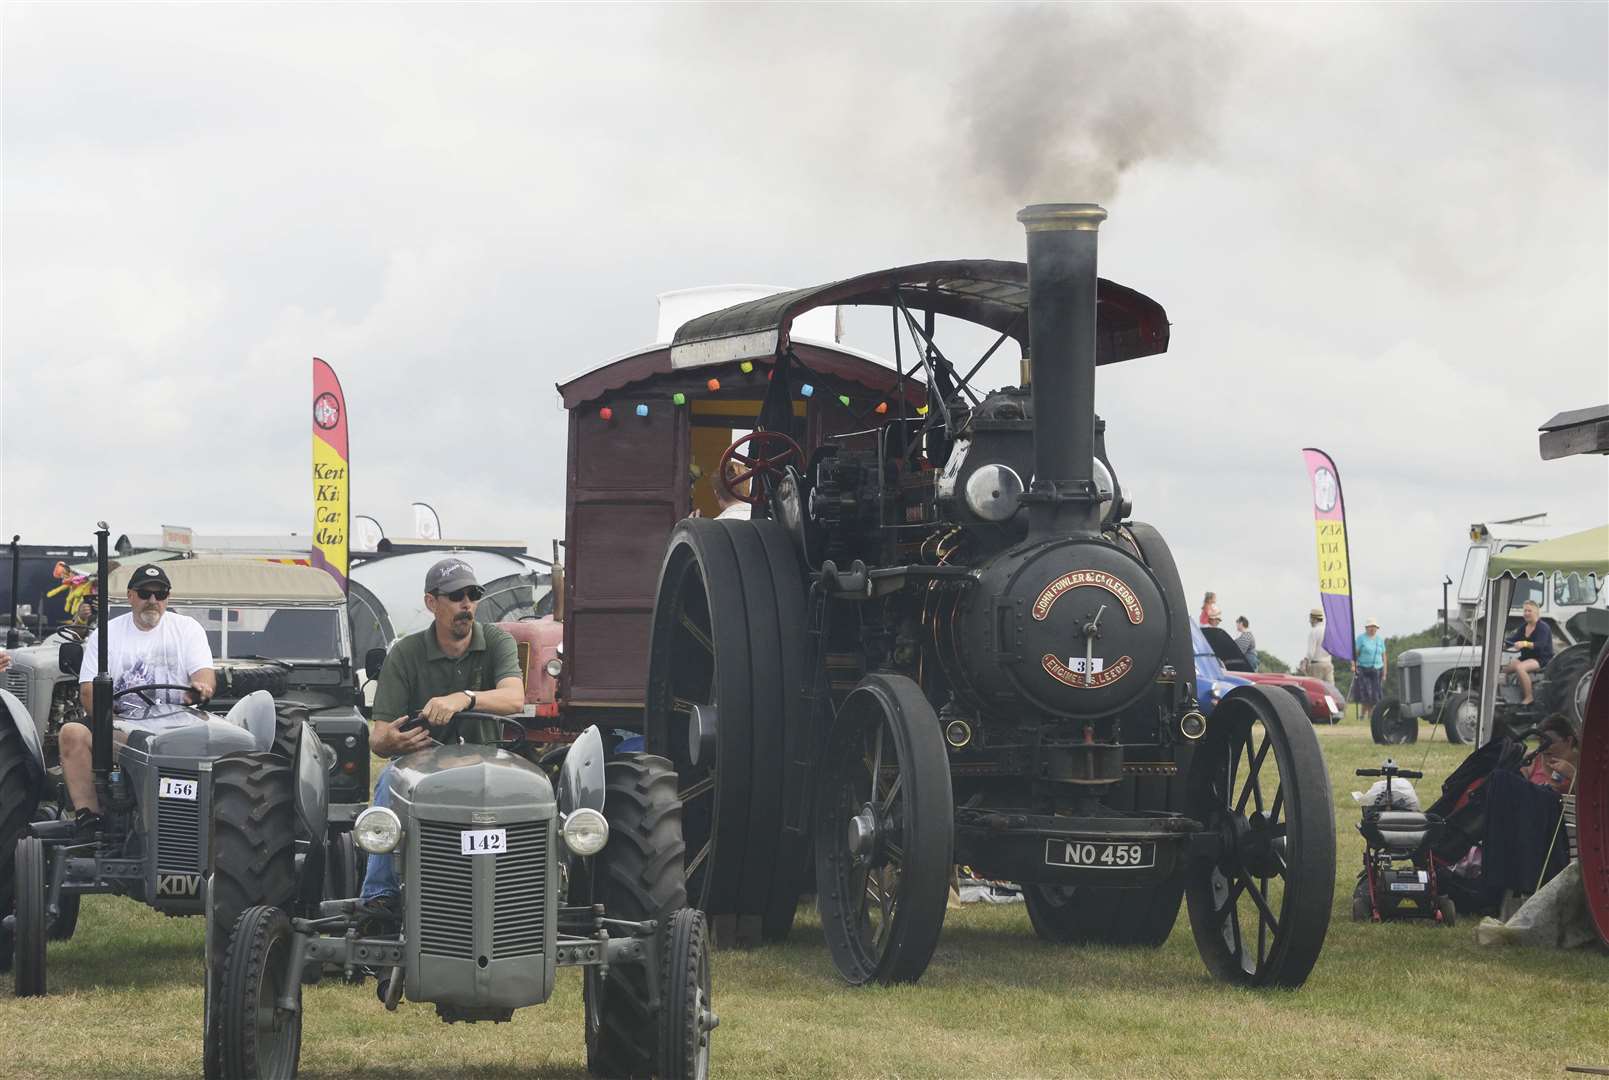 Weald of Kent Steam Rally in 2019 Picture: Paul Amos